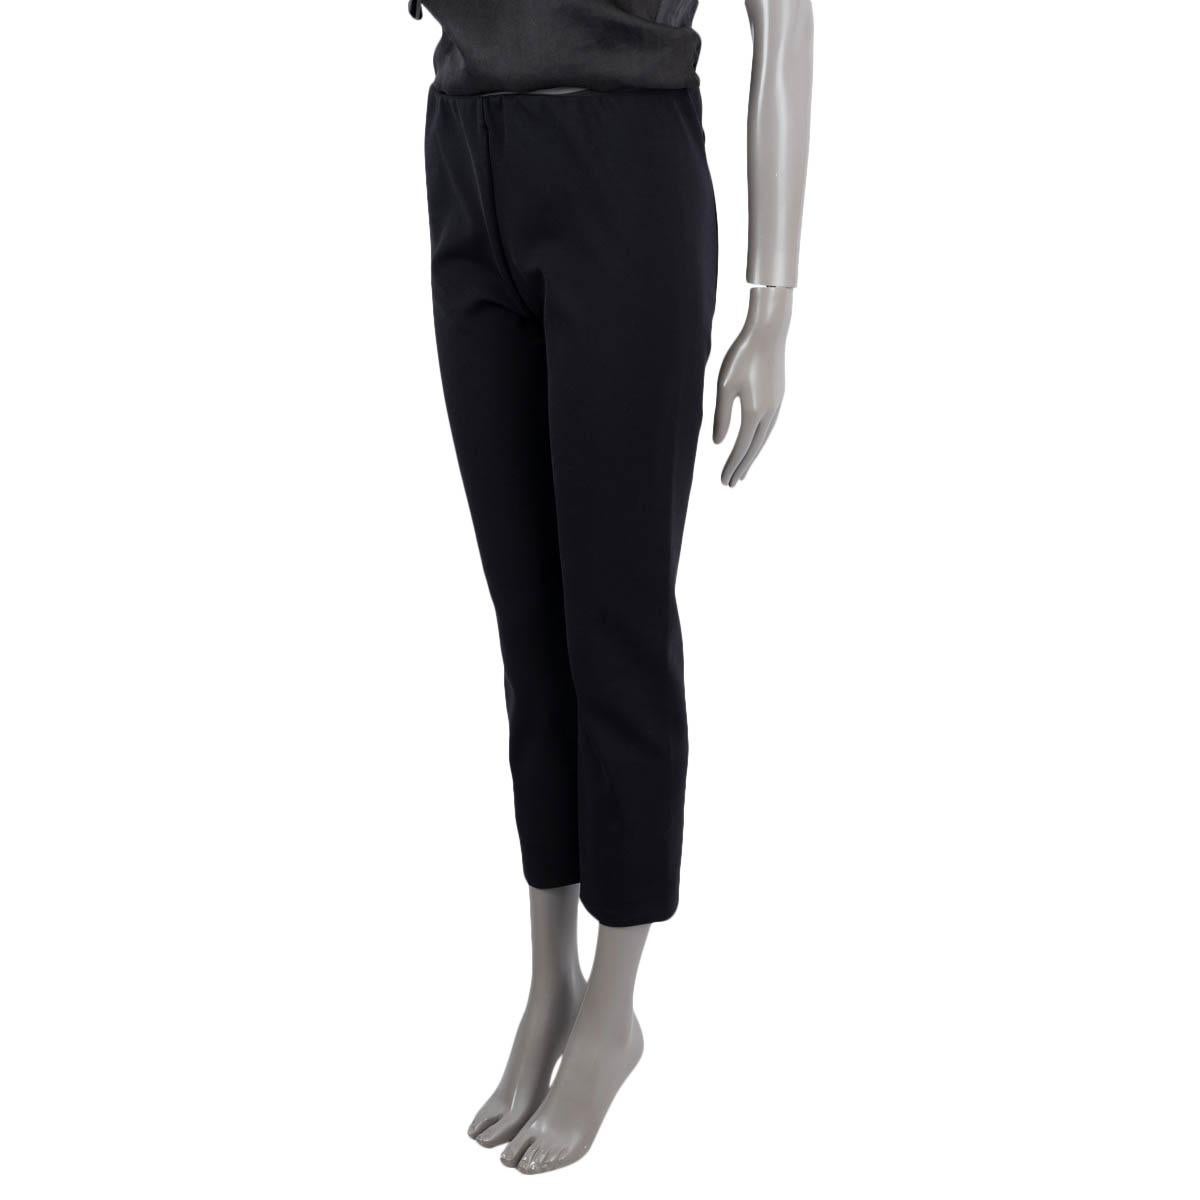 100% authentic The Row Wistworth pants in black polyamide (87%) elaastane (13%) with an elastic stretch-waistband. Unlined

Measurements
Tag Size	L
Size	L
Waist From	80cm (31.2in)
Hips From	90cm (35.1in)
Length	89cm (34.7in)
Inseam	66cm